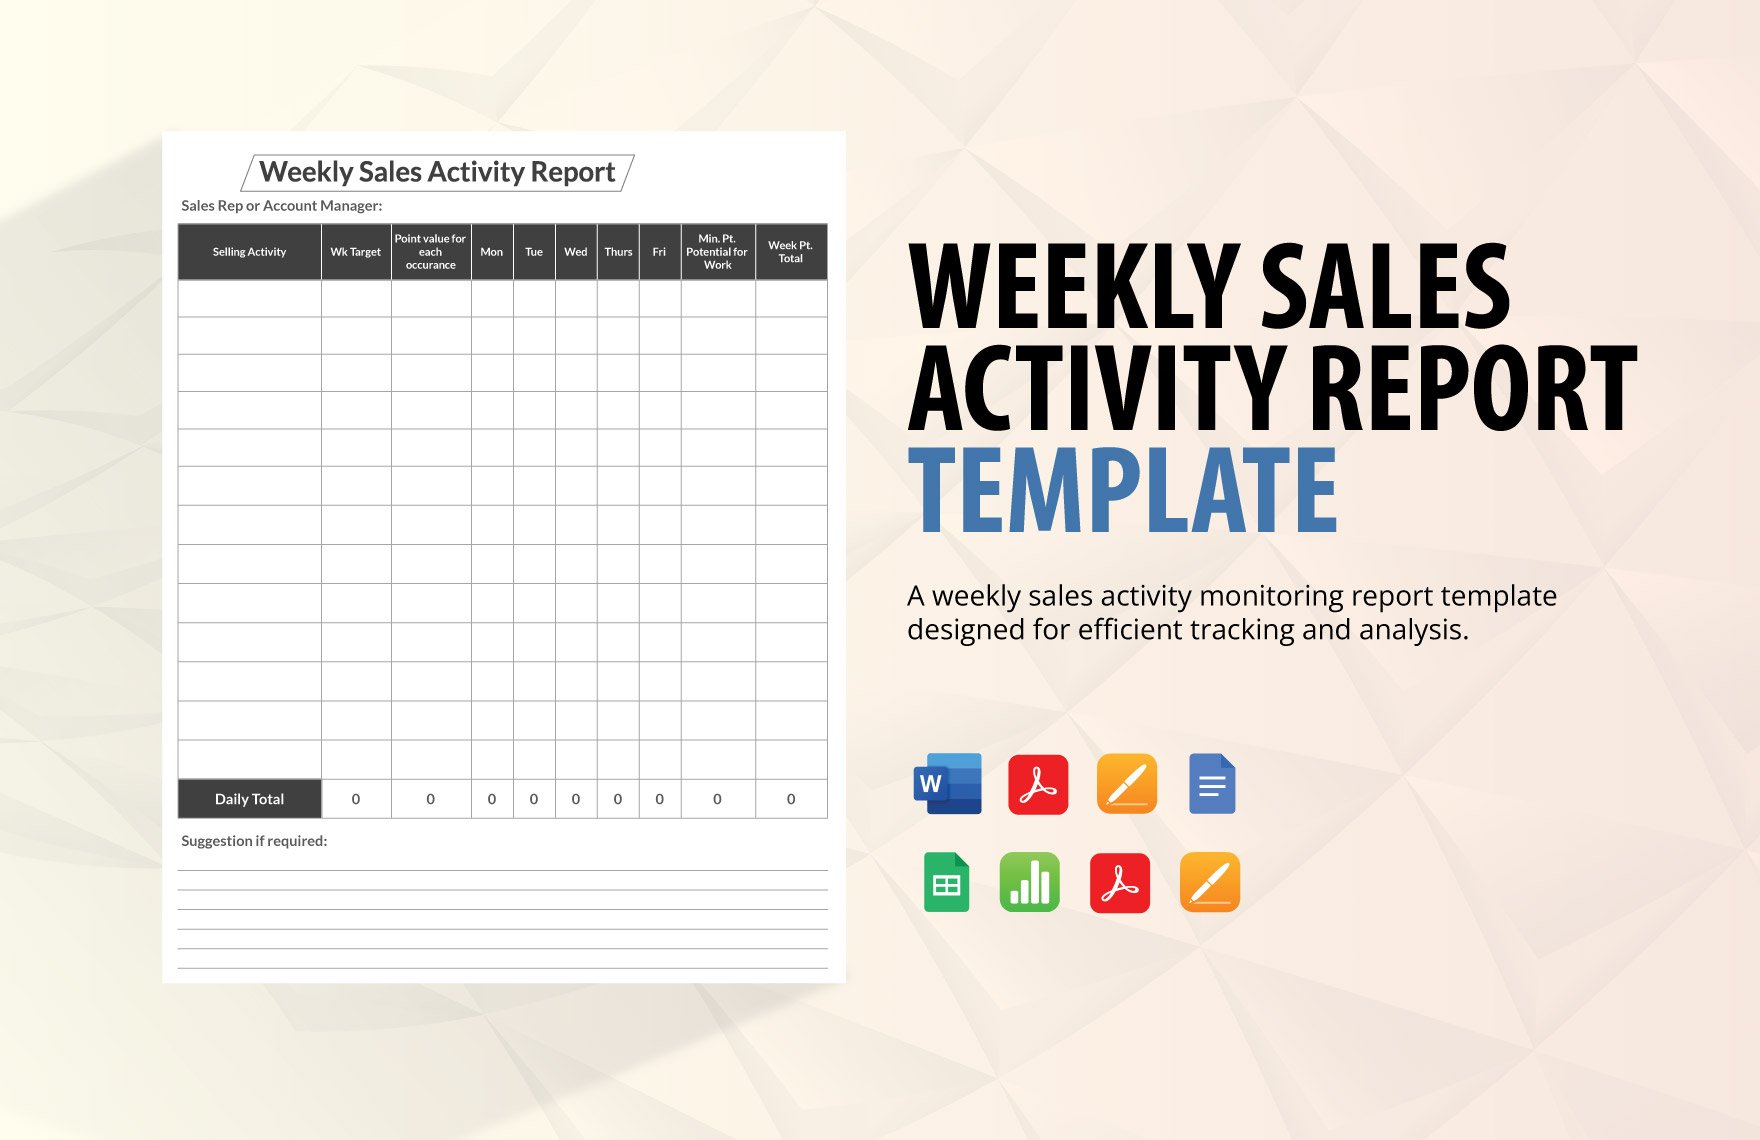 Weekly Sales Activity Report Template in Word, Google Docs, PDF, Google Sheets, Apple Pages, Apple Numbers